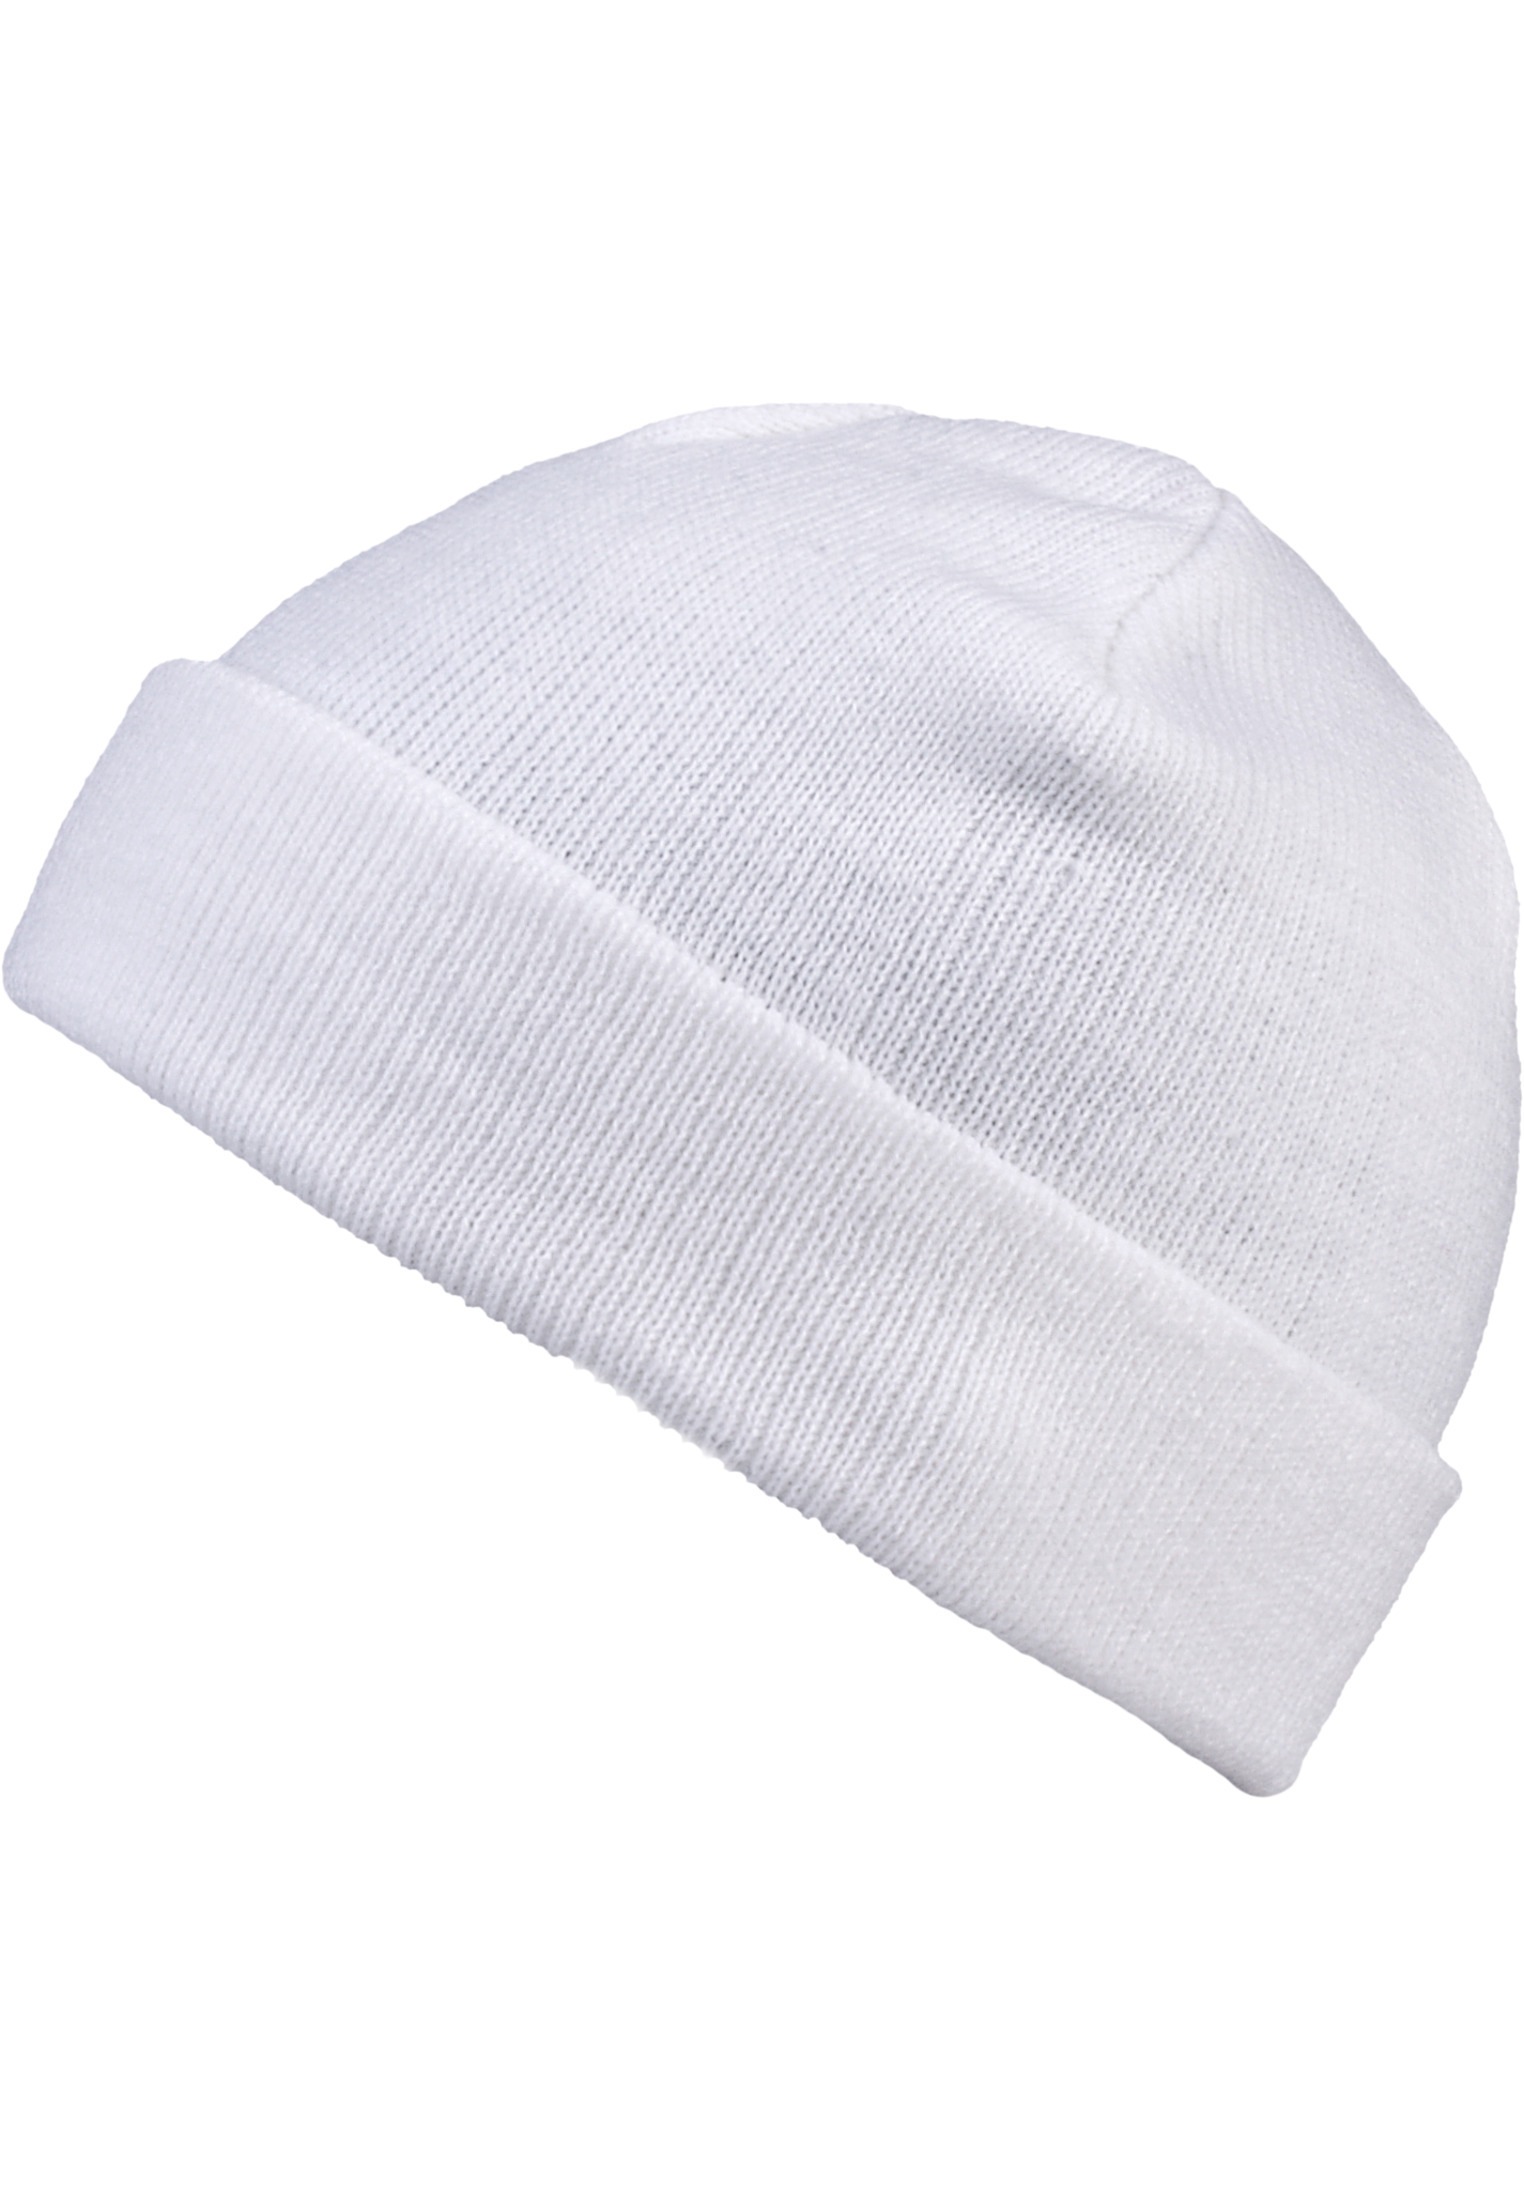 MSTRDS Beanie »MSTRDS Accessoires Short Cuff Knit Beanie«, (1 St.)